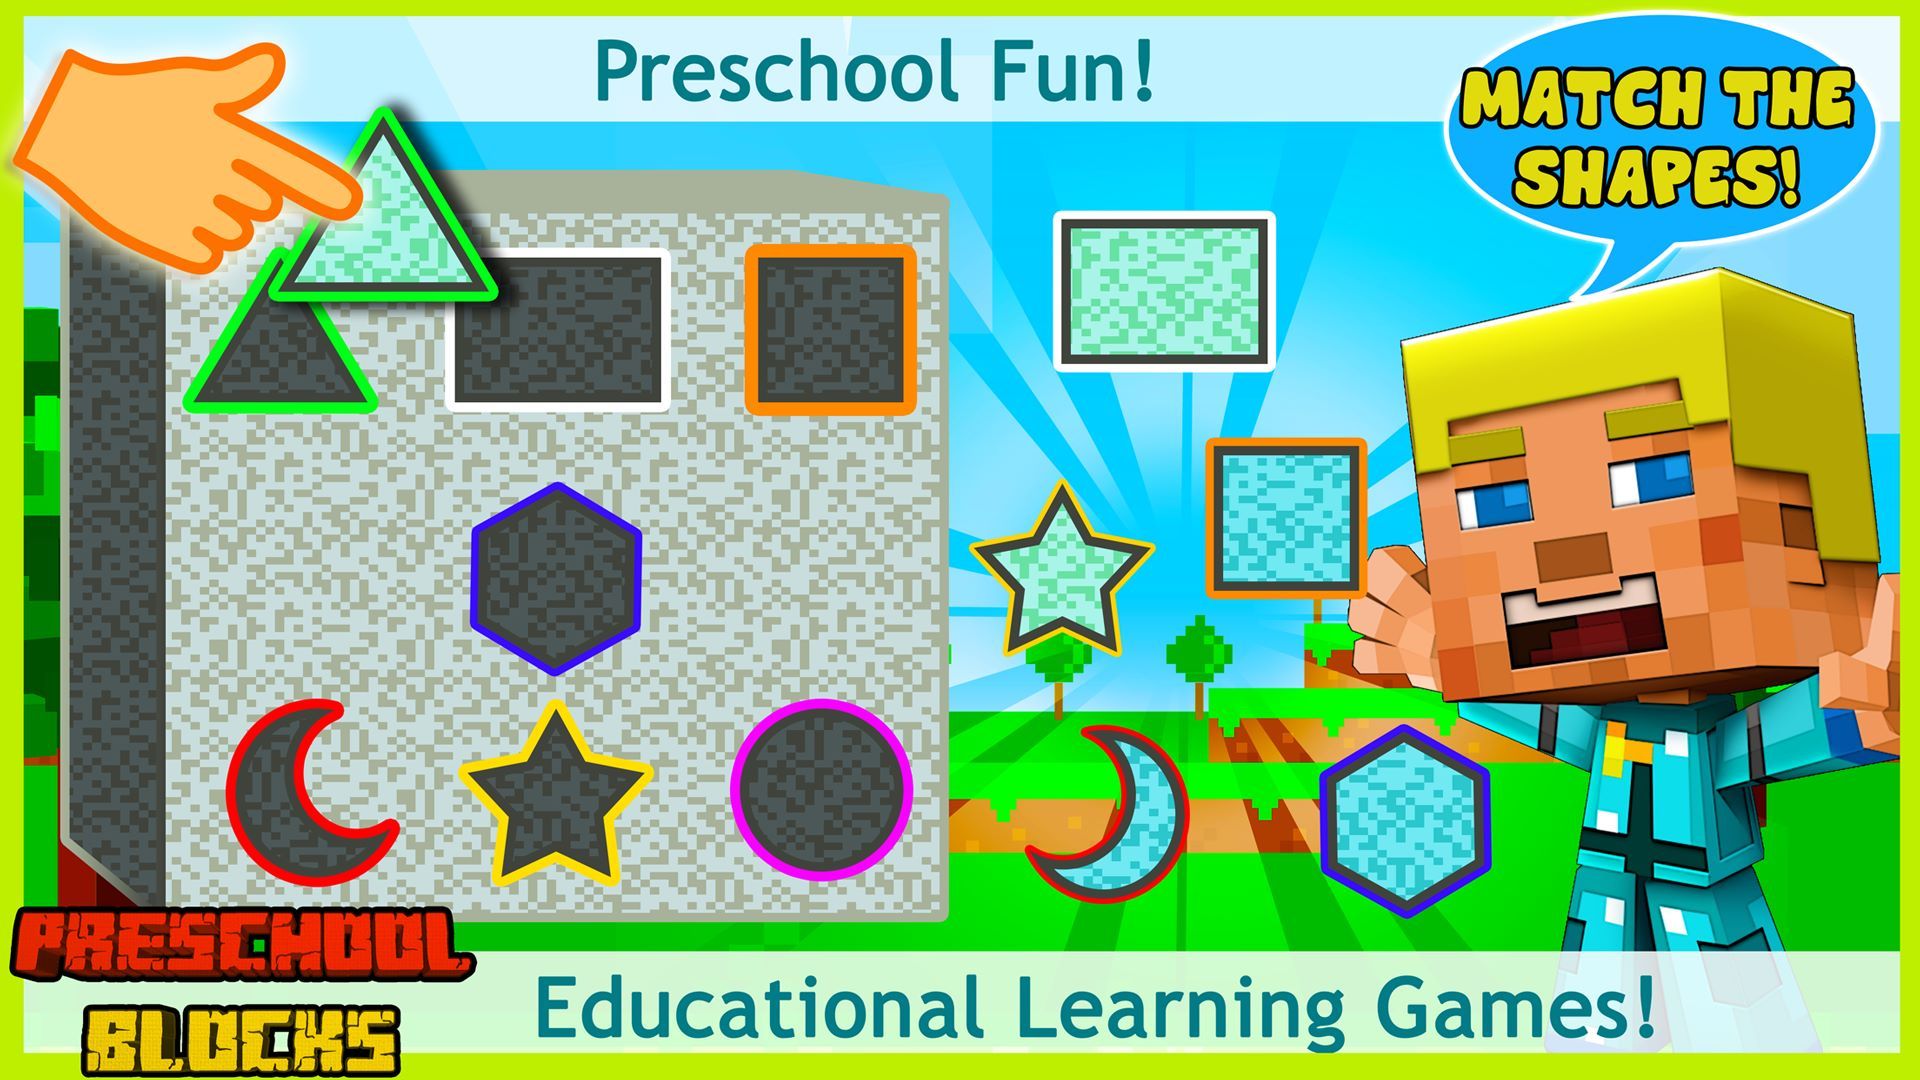 Fun Educational Games and puzzles for Kids Free - Preschool Adventure for Kindergarten and Preschool Boys and Girls Under Ages 2, 3, 4, 5 Years Old